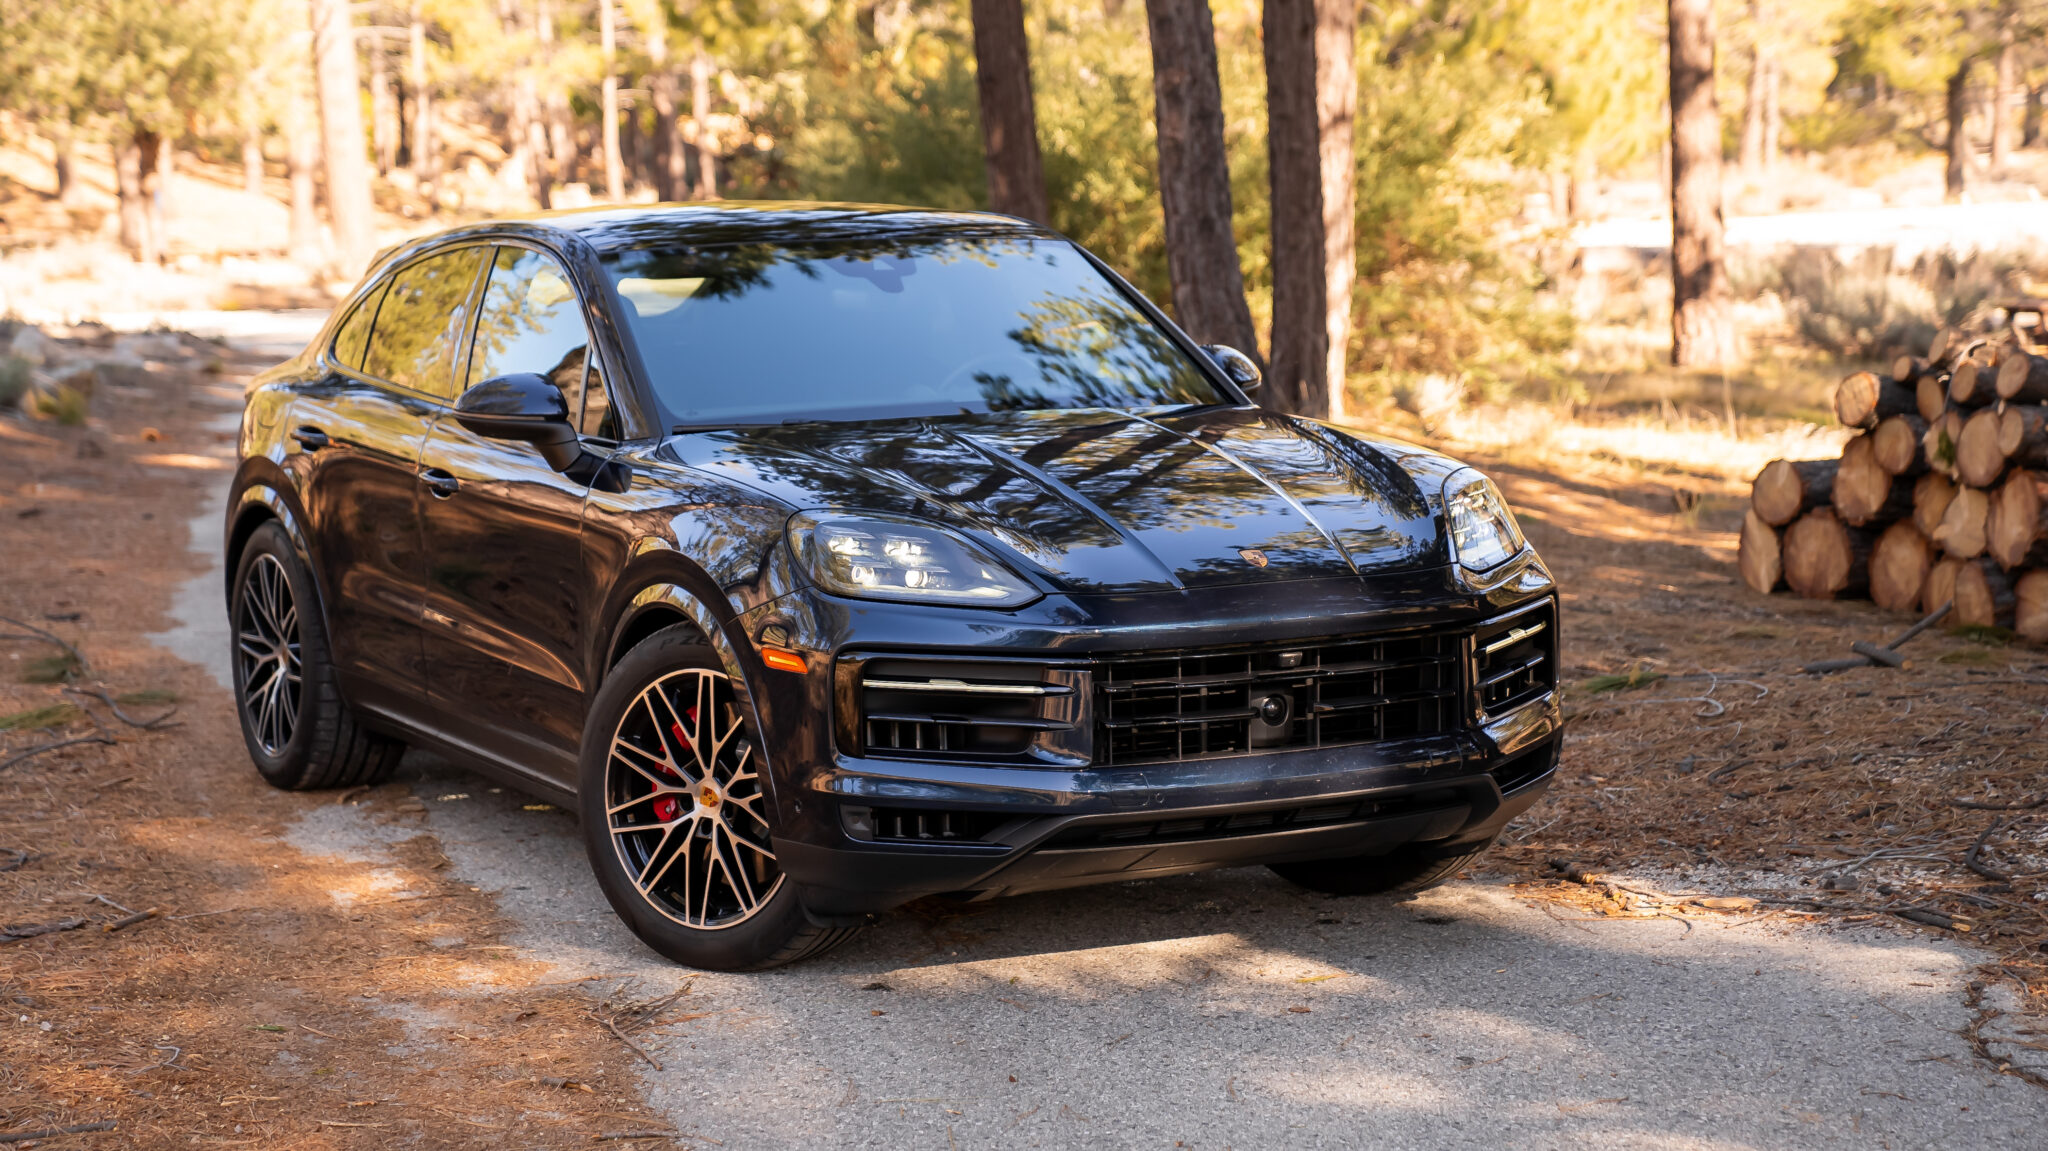 An image of a Porsche Cayenne S Coupe parked outdoors.